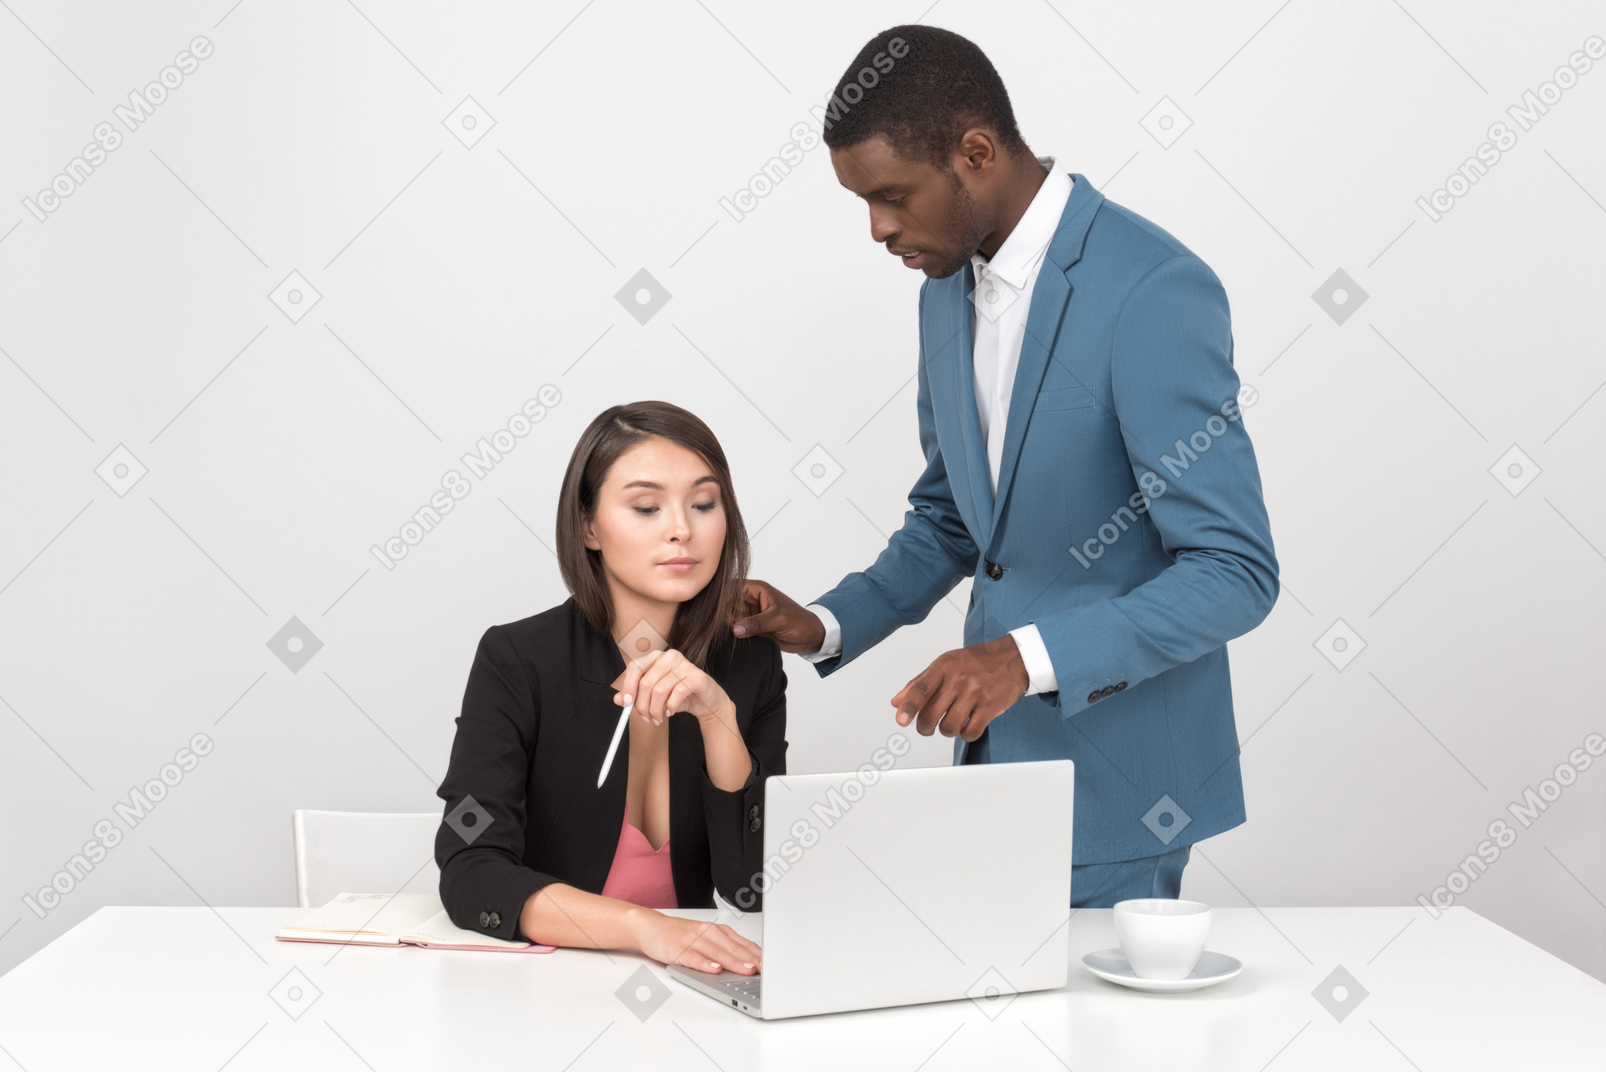 Man explaining some work stuff to female colleague